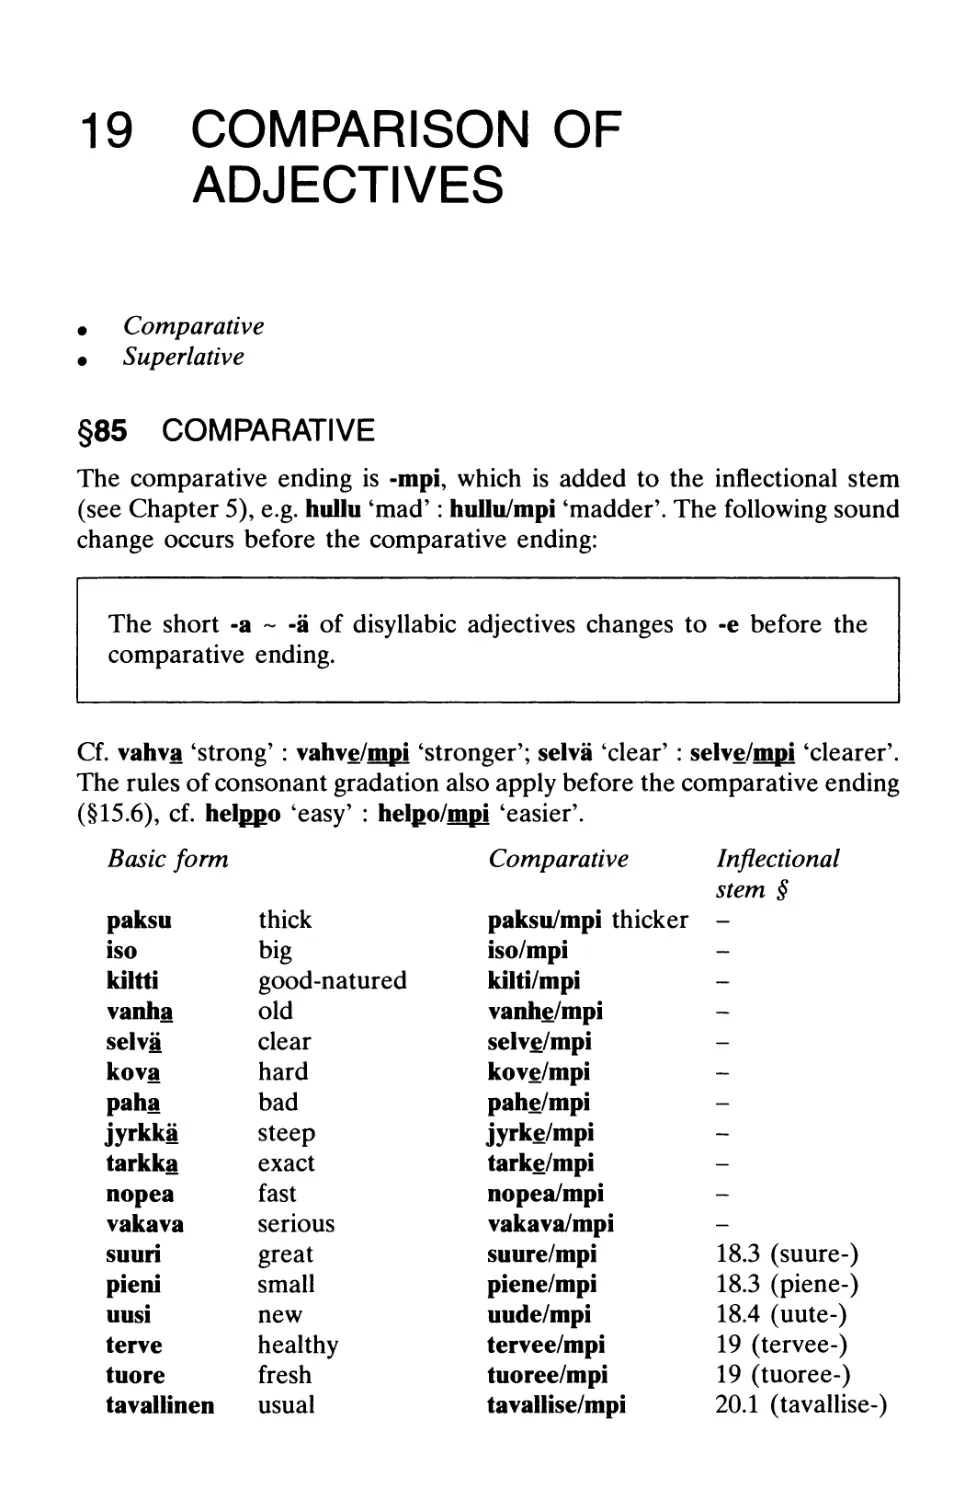 19 Comparison of adjectives